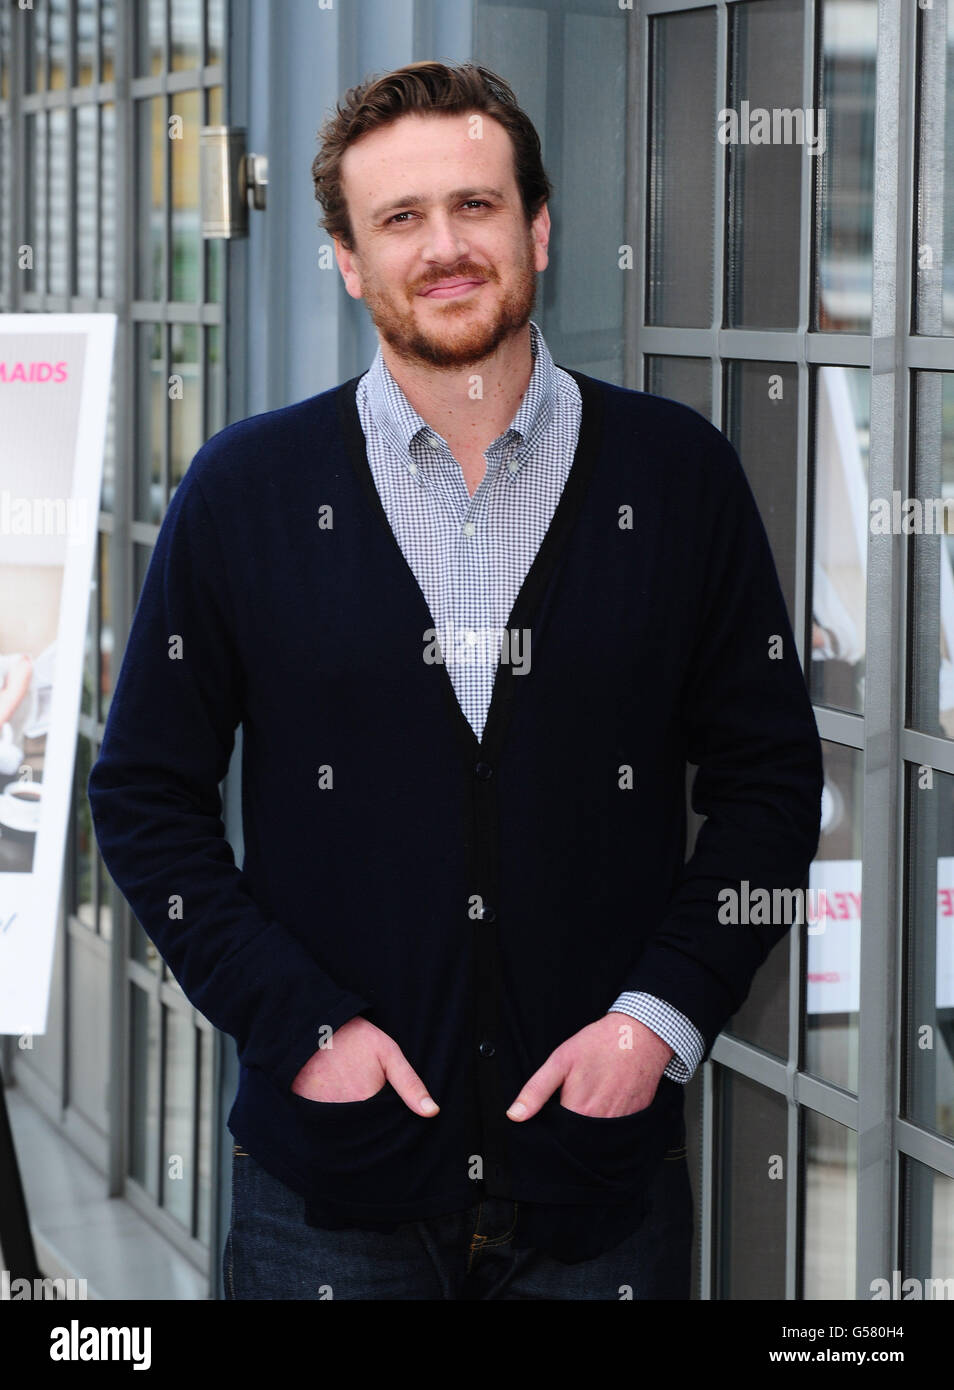 Jason Segel attends a photocall ahead of the release of his new film Five Year Engagement at the Soho Hotel in London. Stock Photo